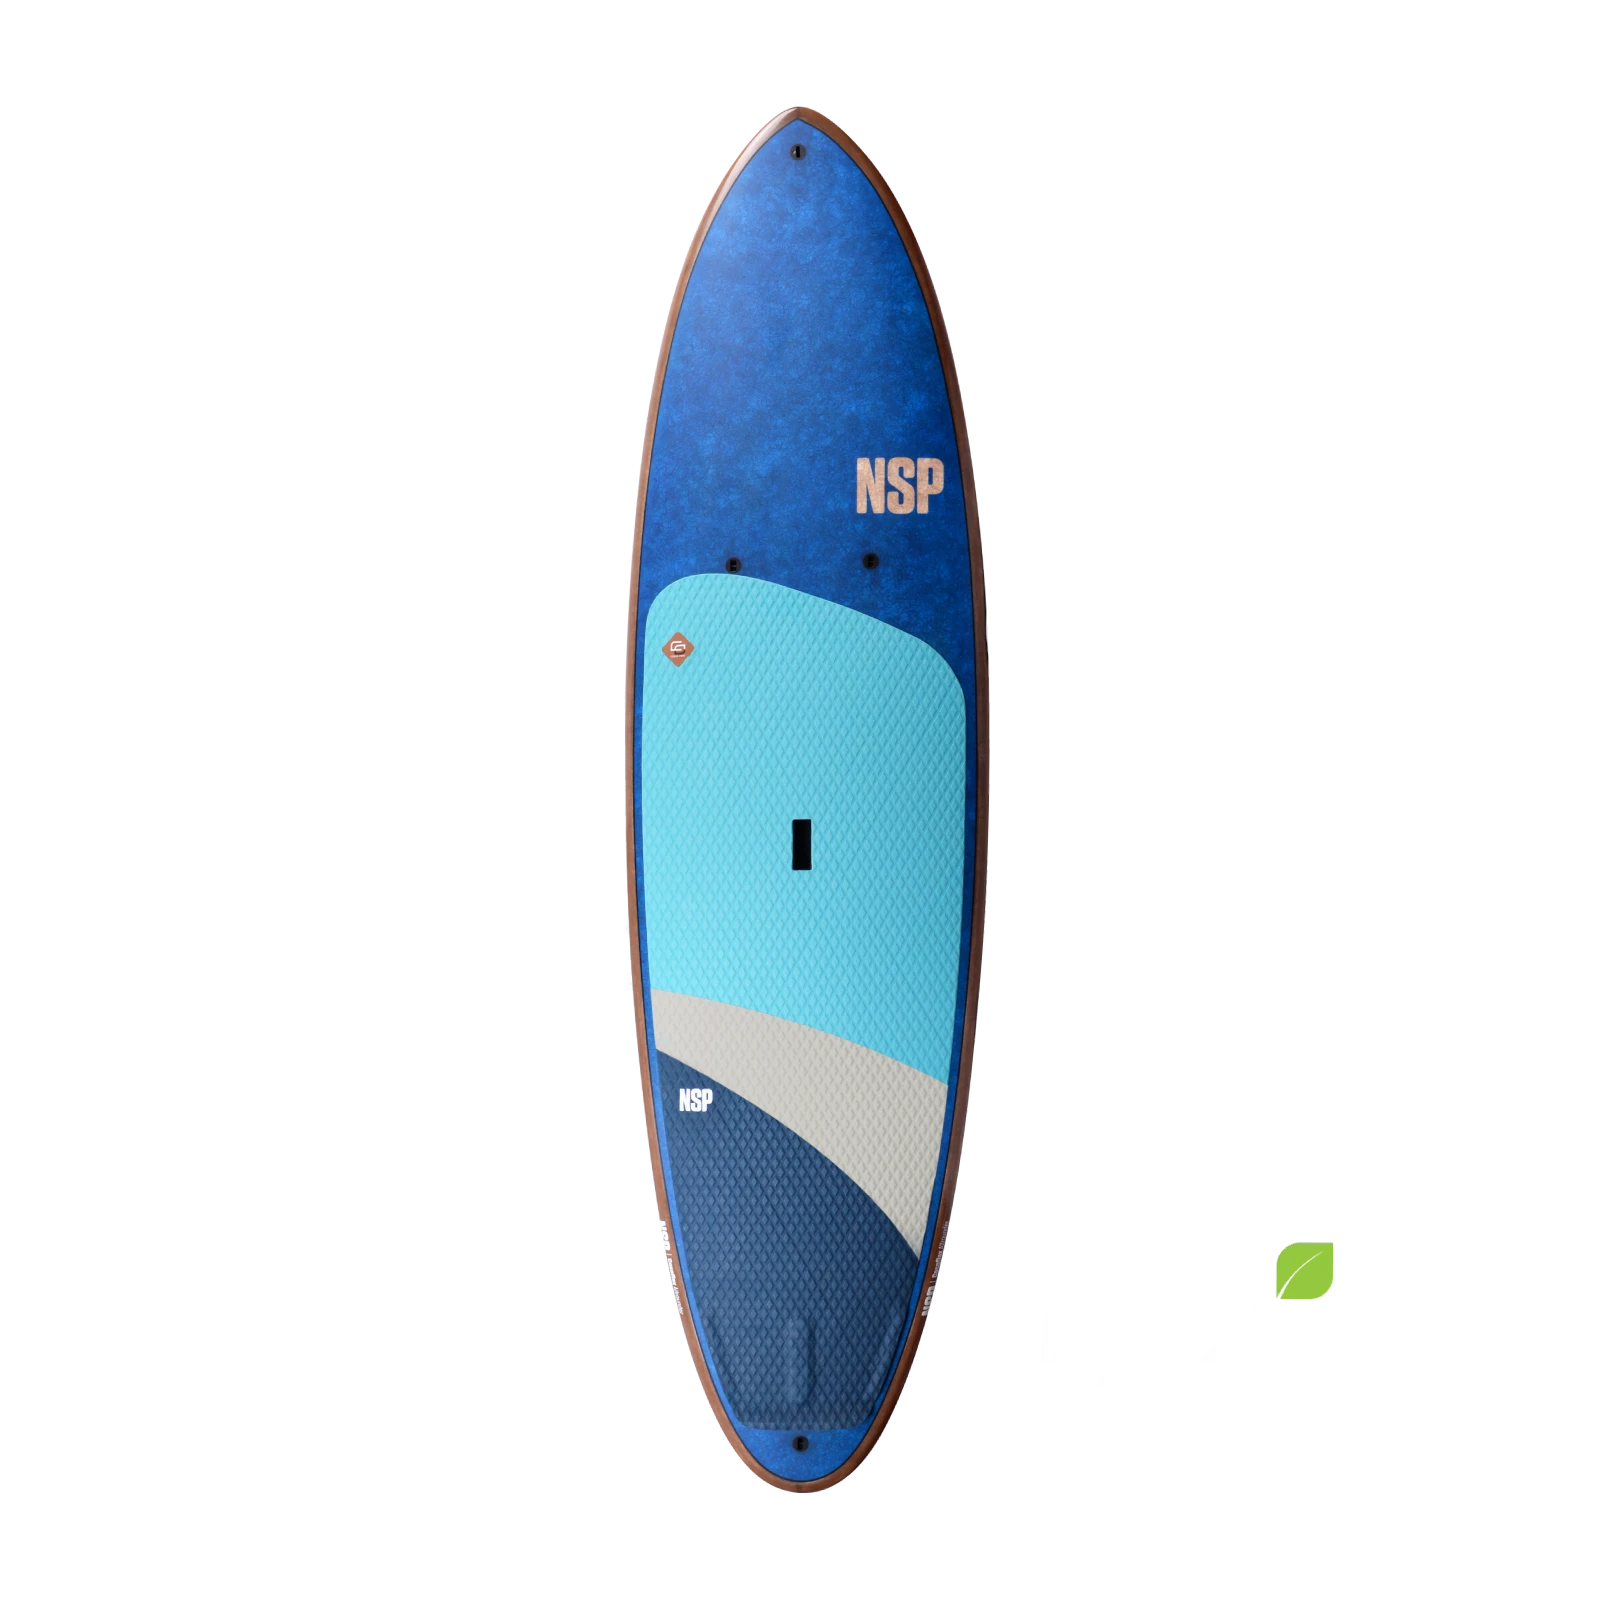 Allrounder - Cocoflax Coco-Flax NSP 10'0